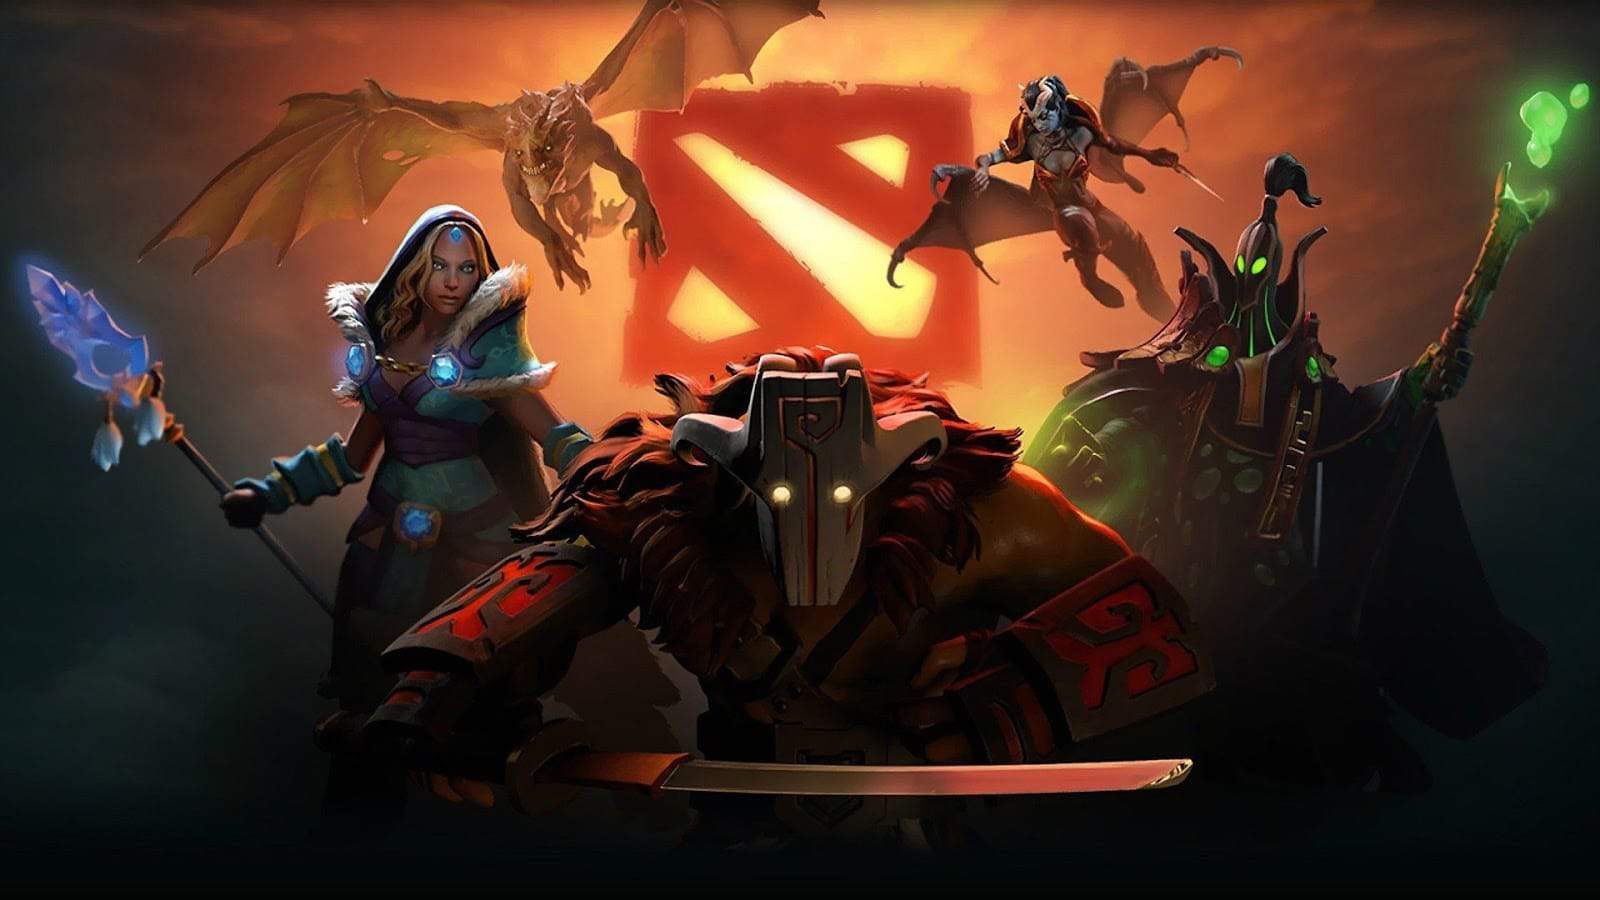 How To Play Dota 2; The Beginner’s Guide